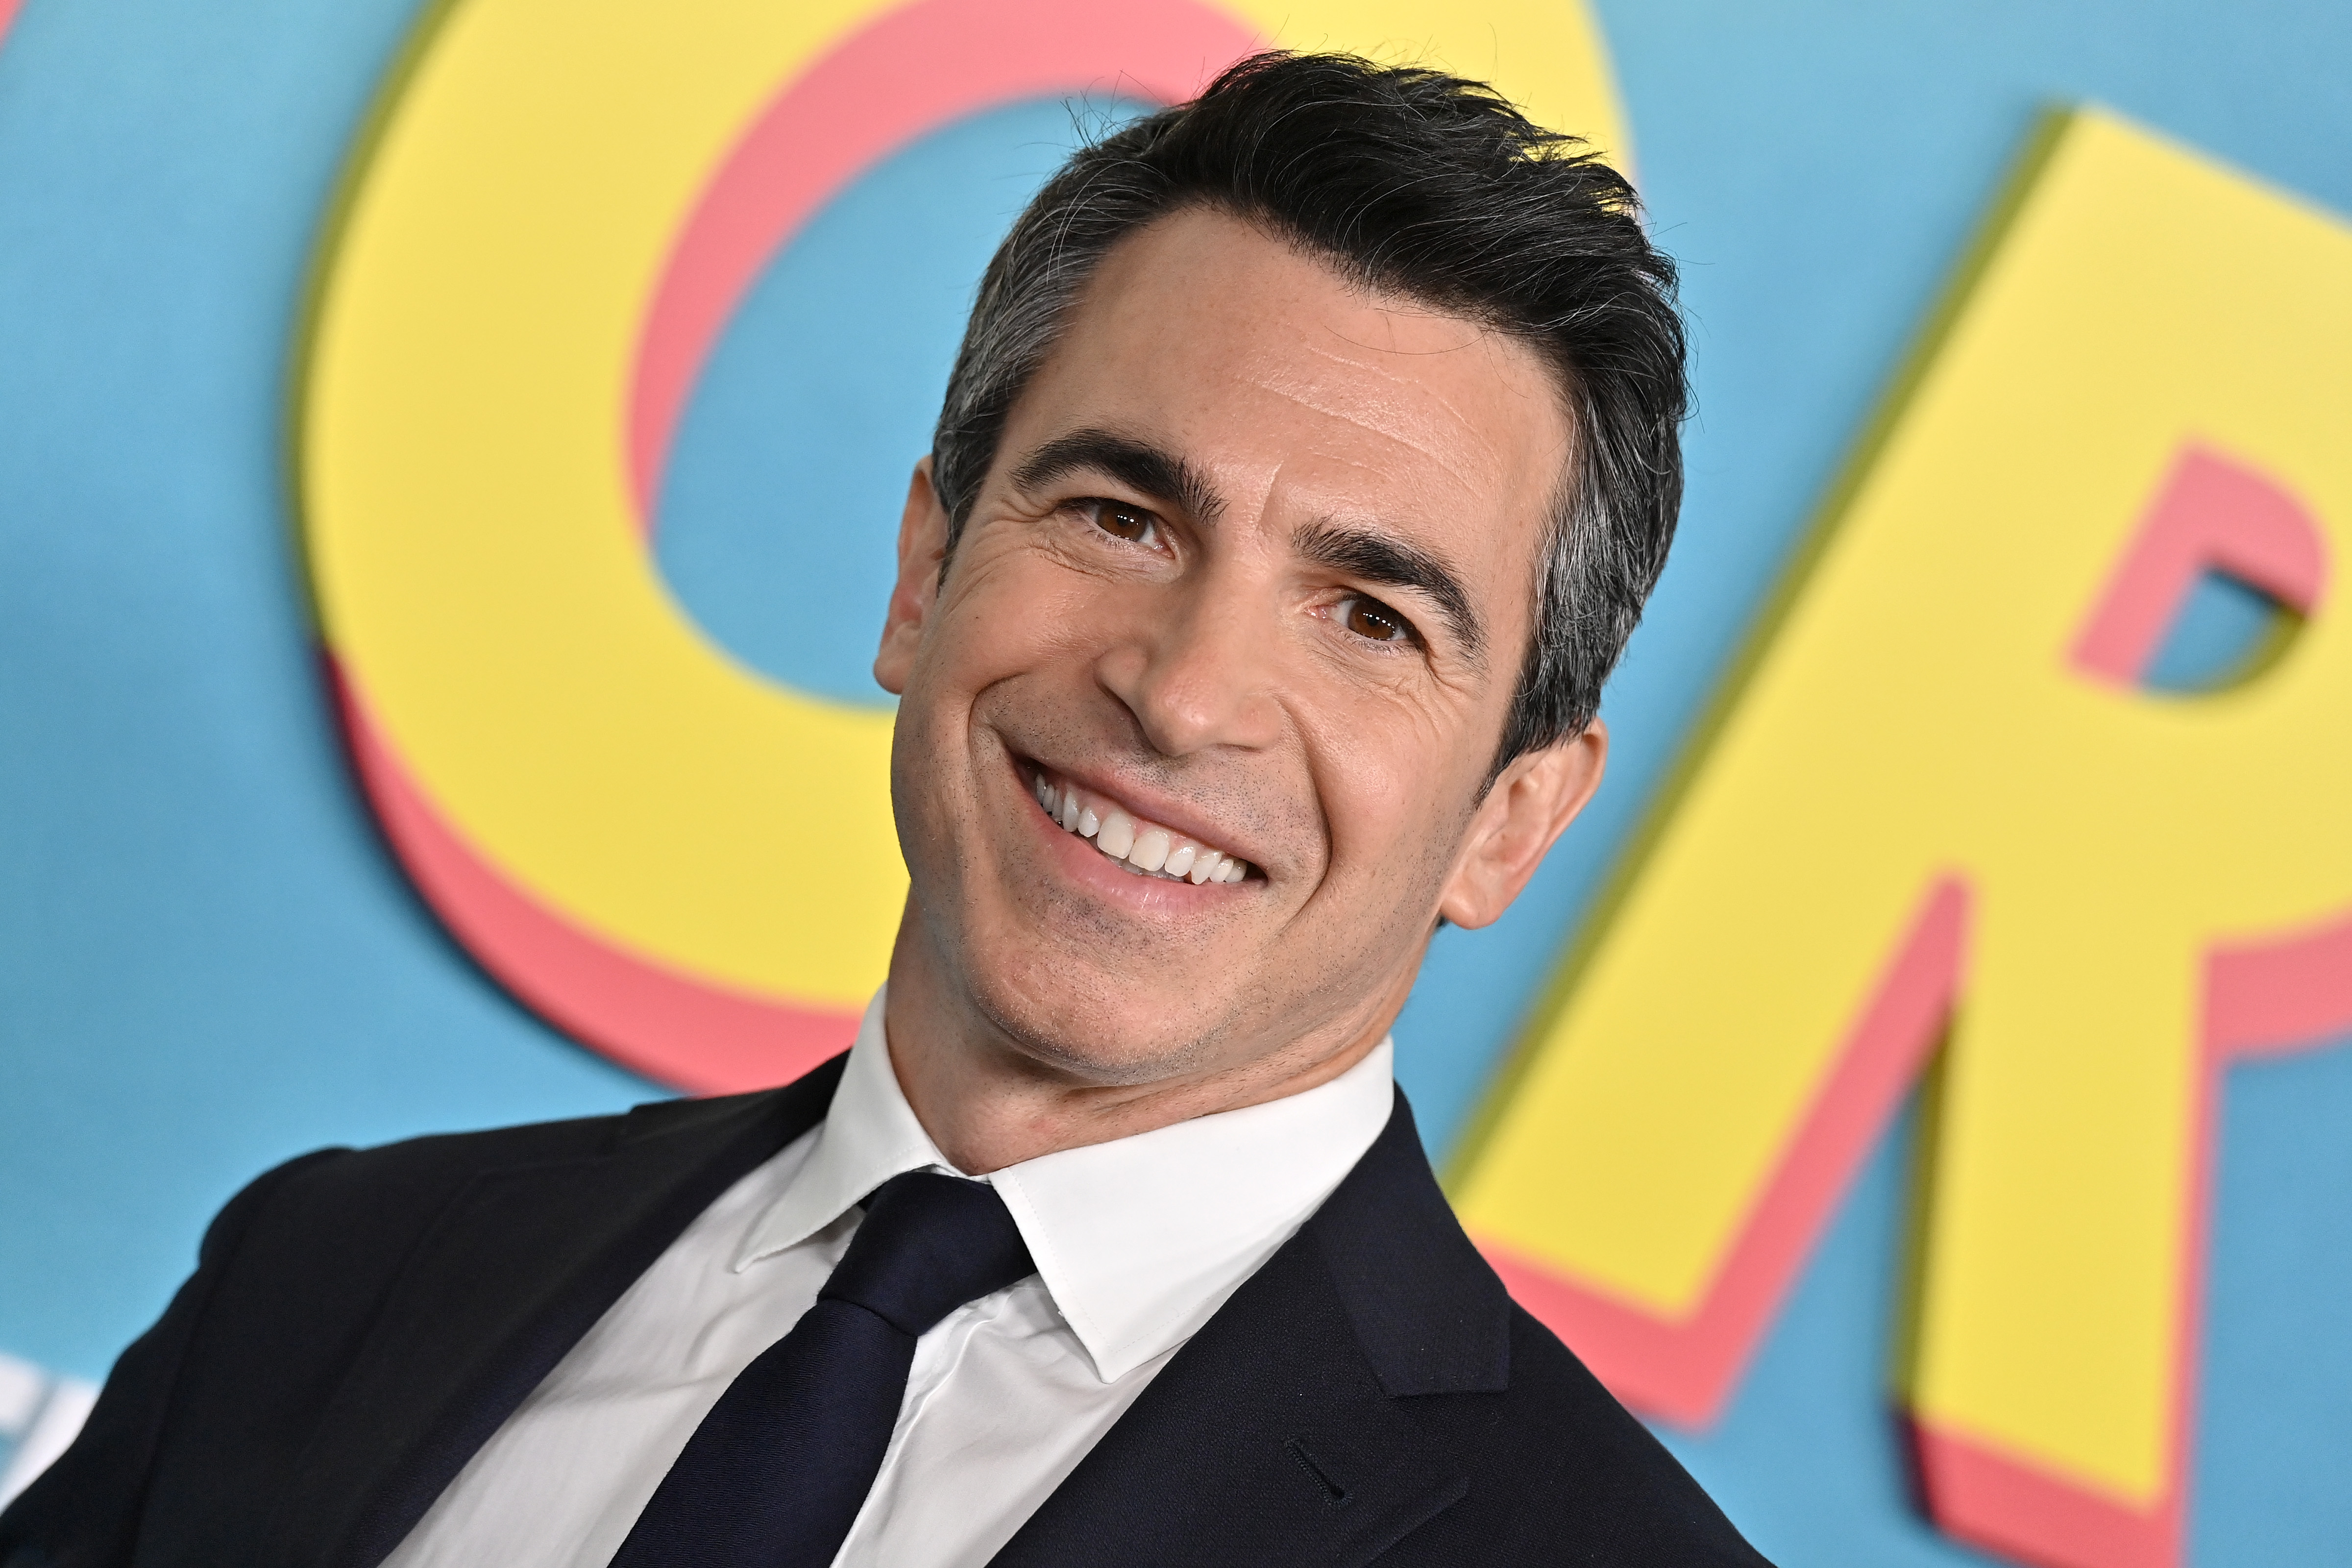 Chris Messina at the premiere for Peacock Original's "Based on a True Story" at Pacific Design Center, on June 1, 2023, in West Hollywood, California. | Source: Getty Images